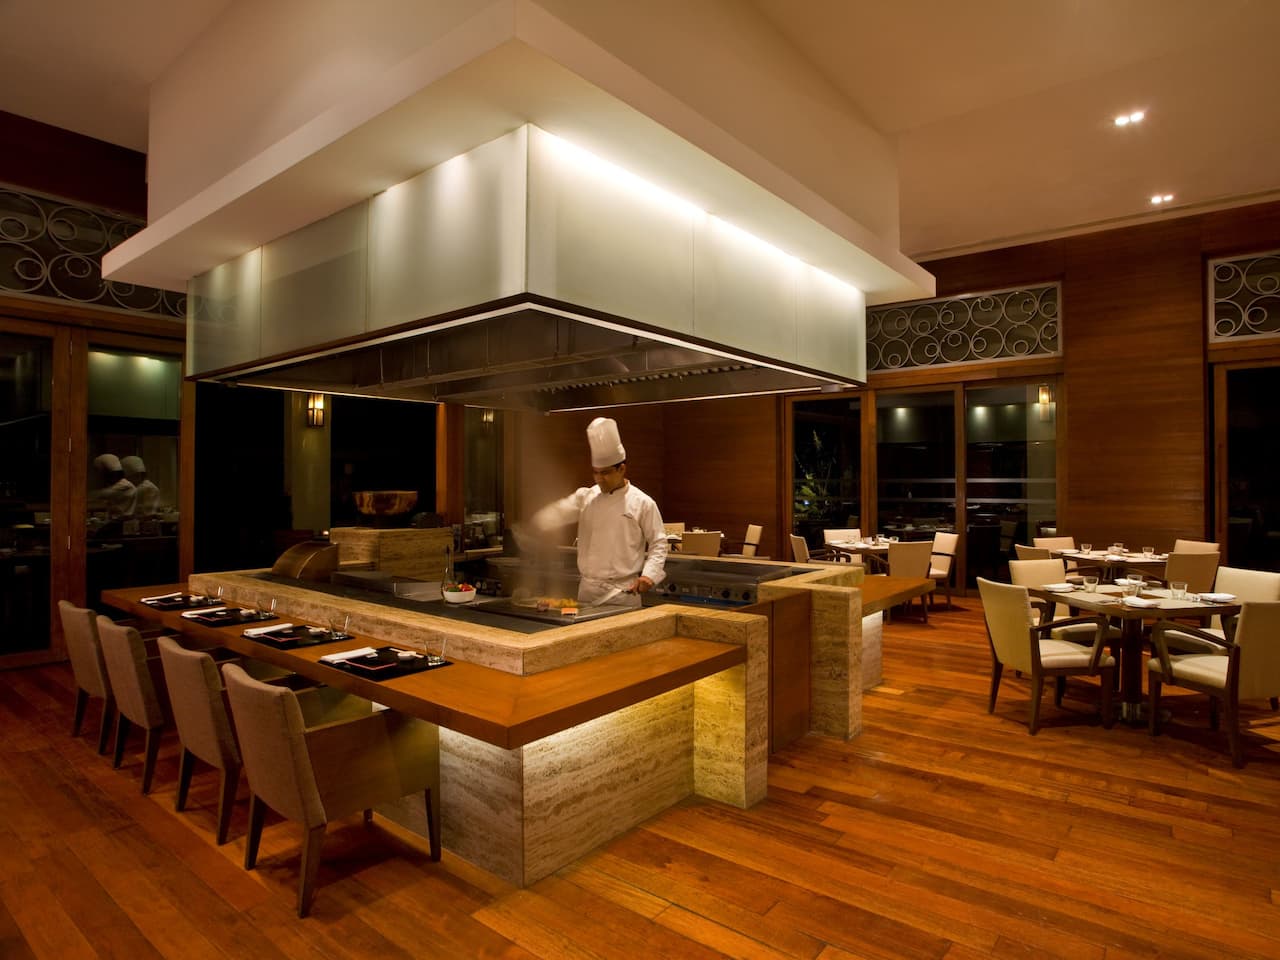 Chef cooking on a teppanyaki grill in a center of the restaurant with the modern wood finish and seating